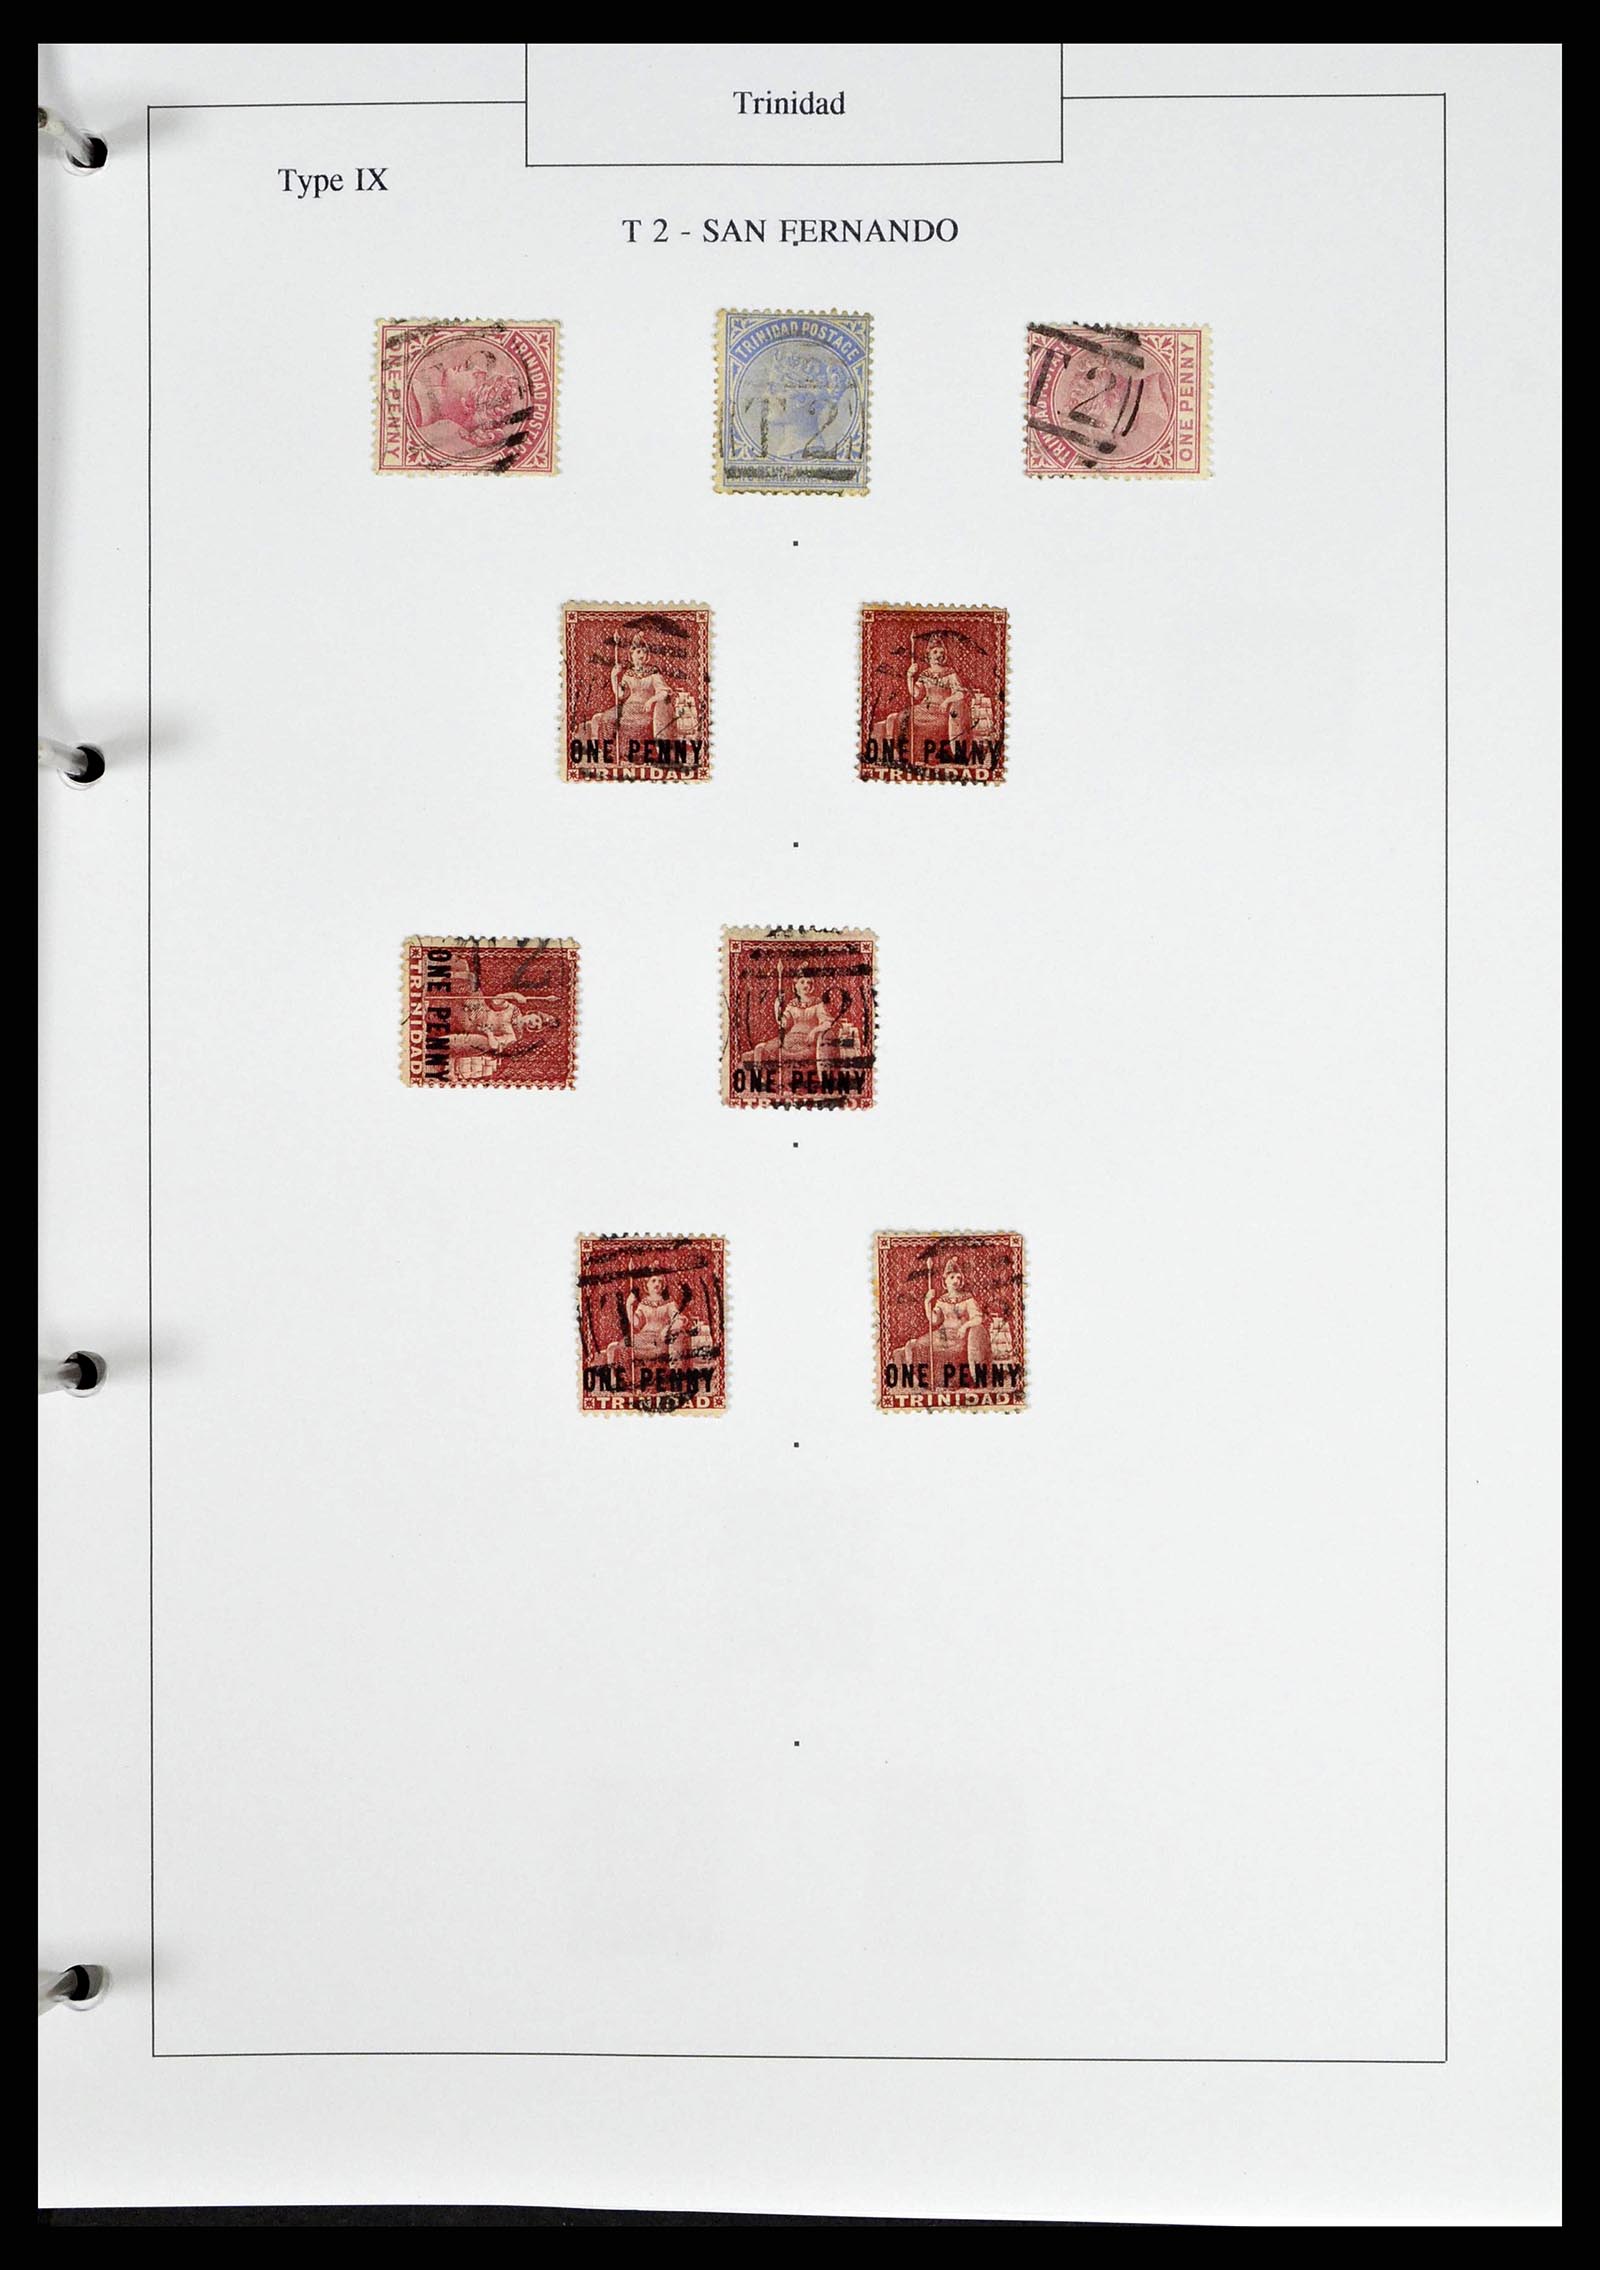 38481 0046 - Stamp collection 38481 Trinidad and Tobago cancels 1859-1960.